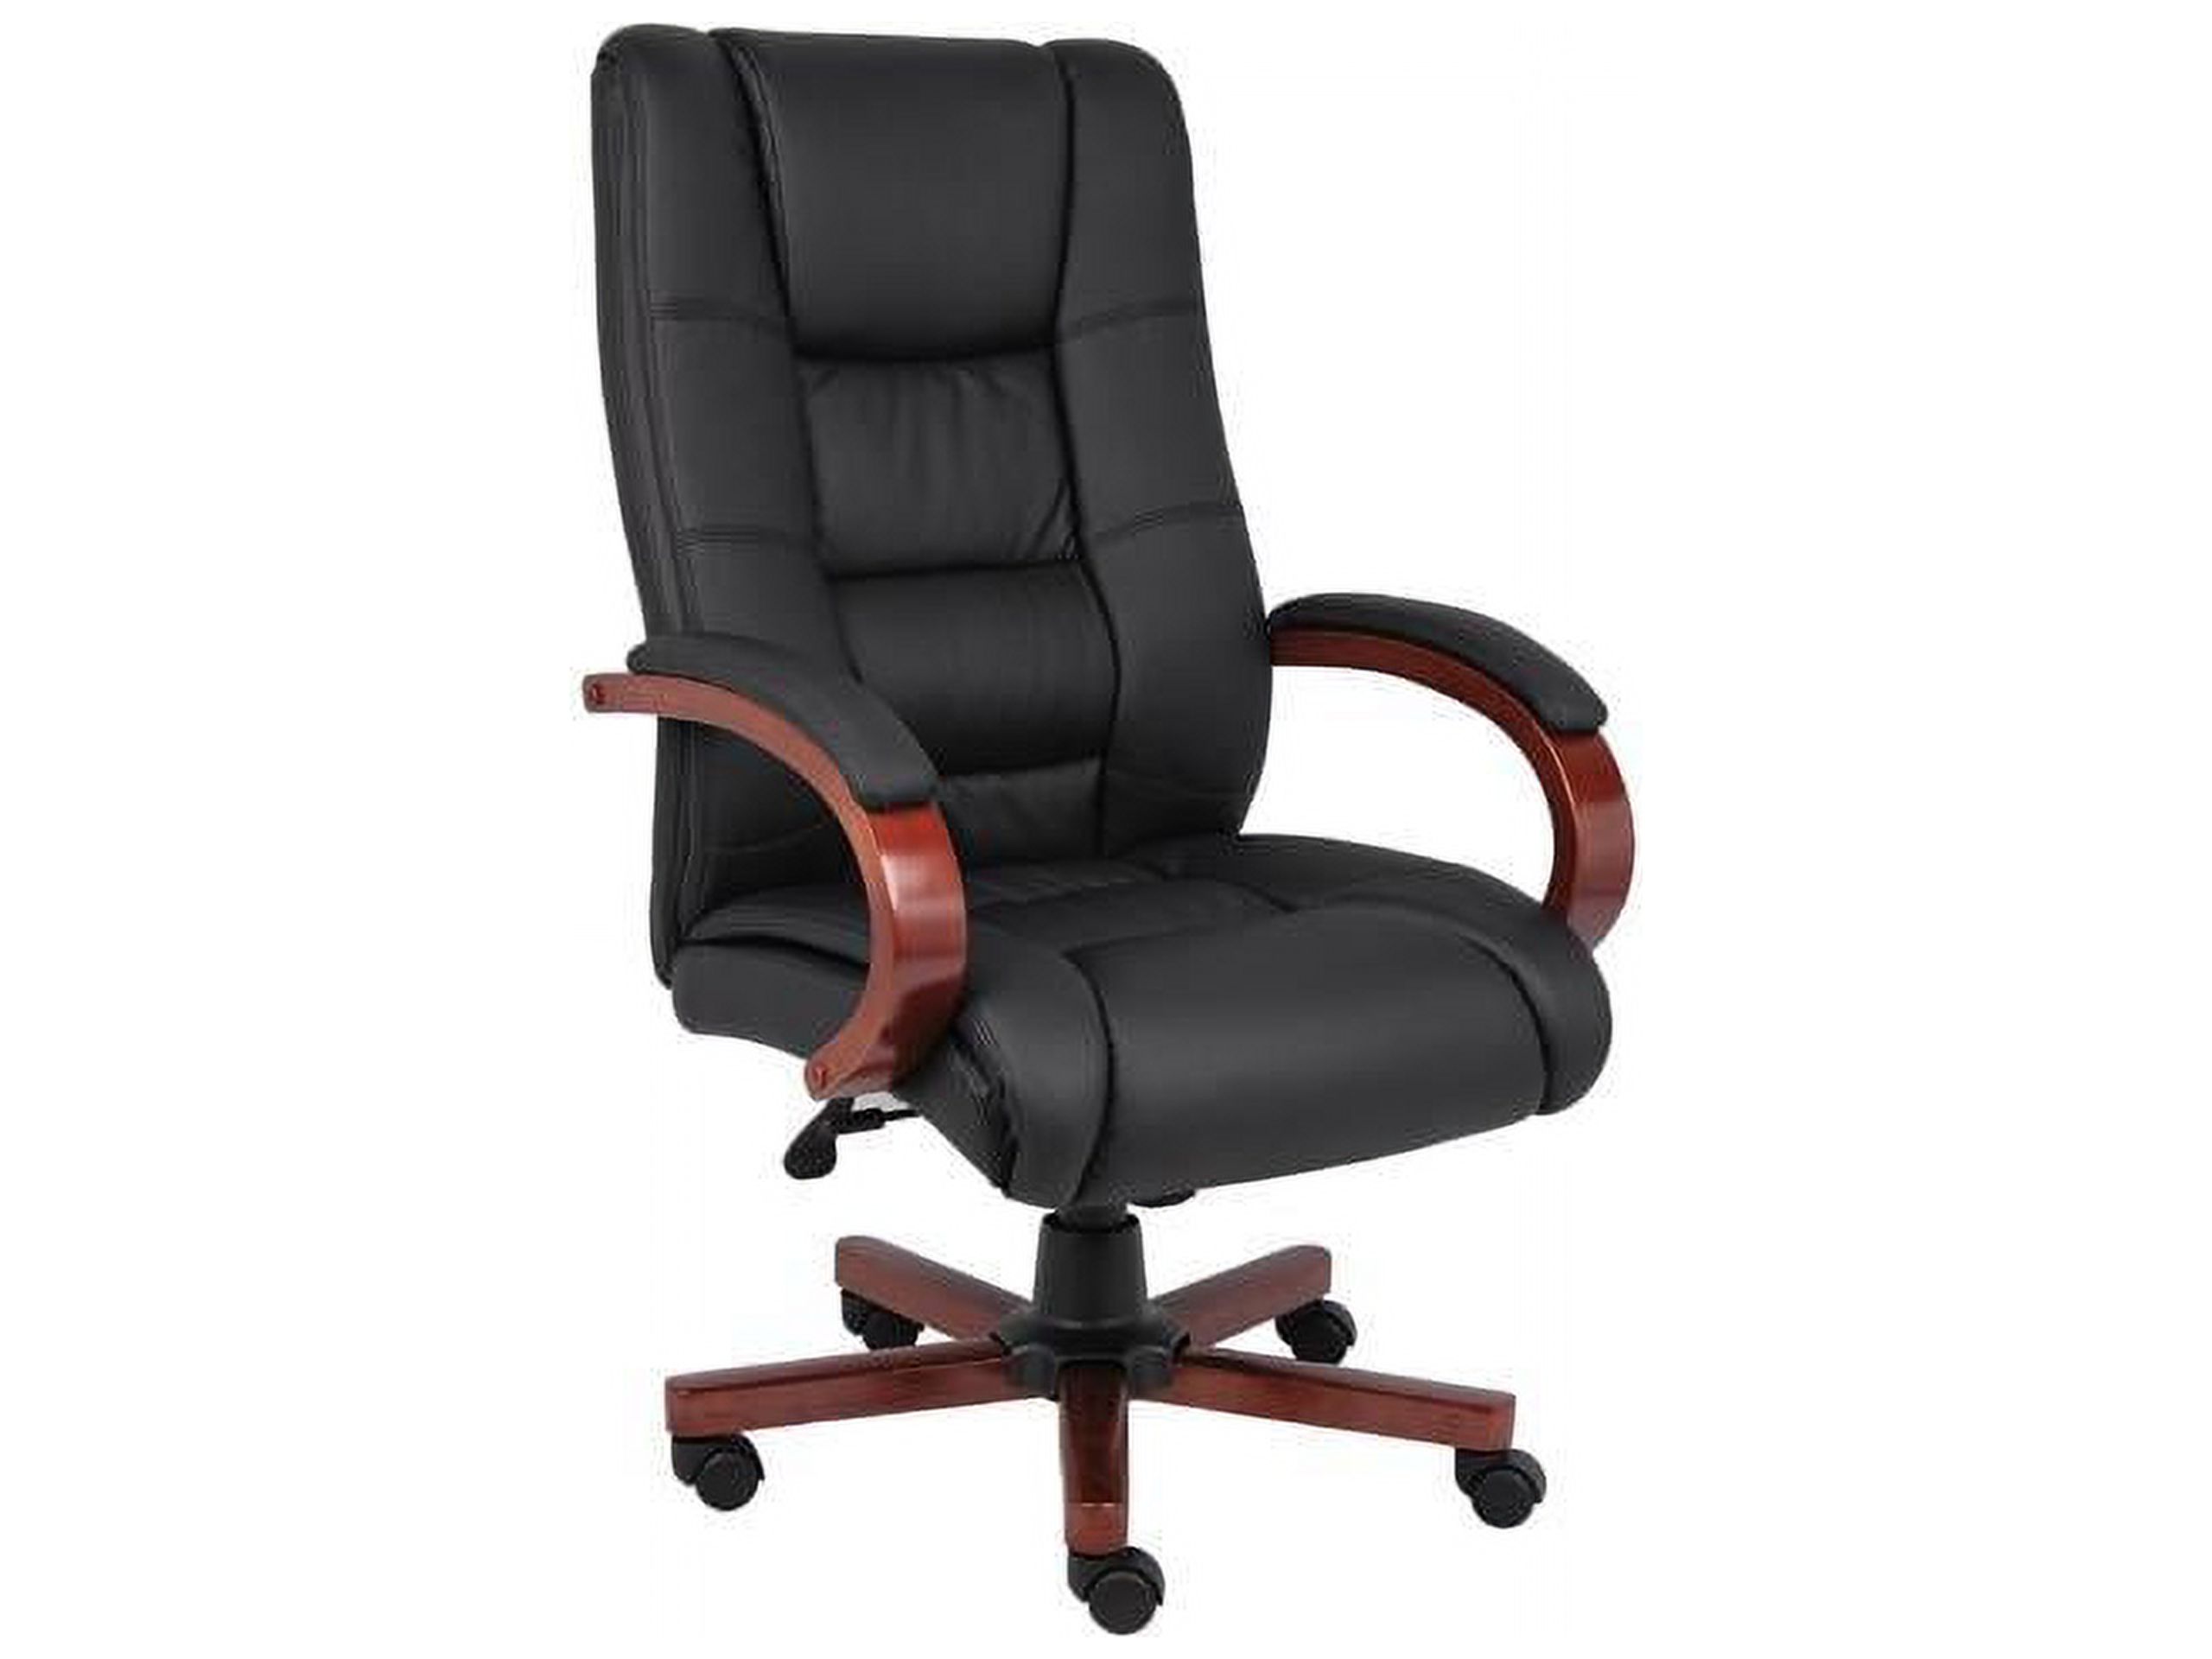 BOSS Office Products B8991-C Executive Chairs - image 1 of 5